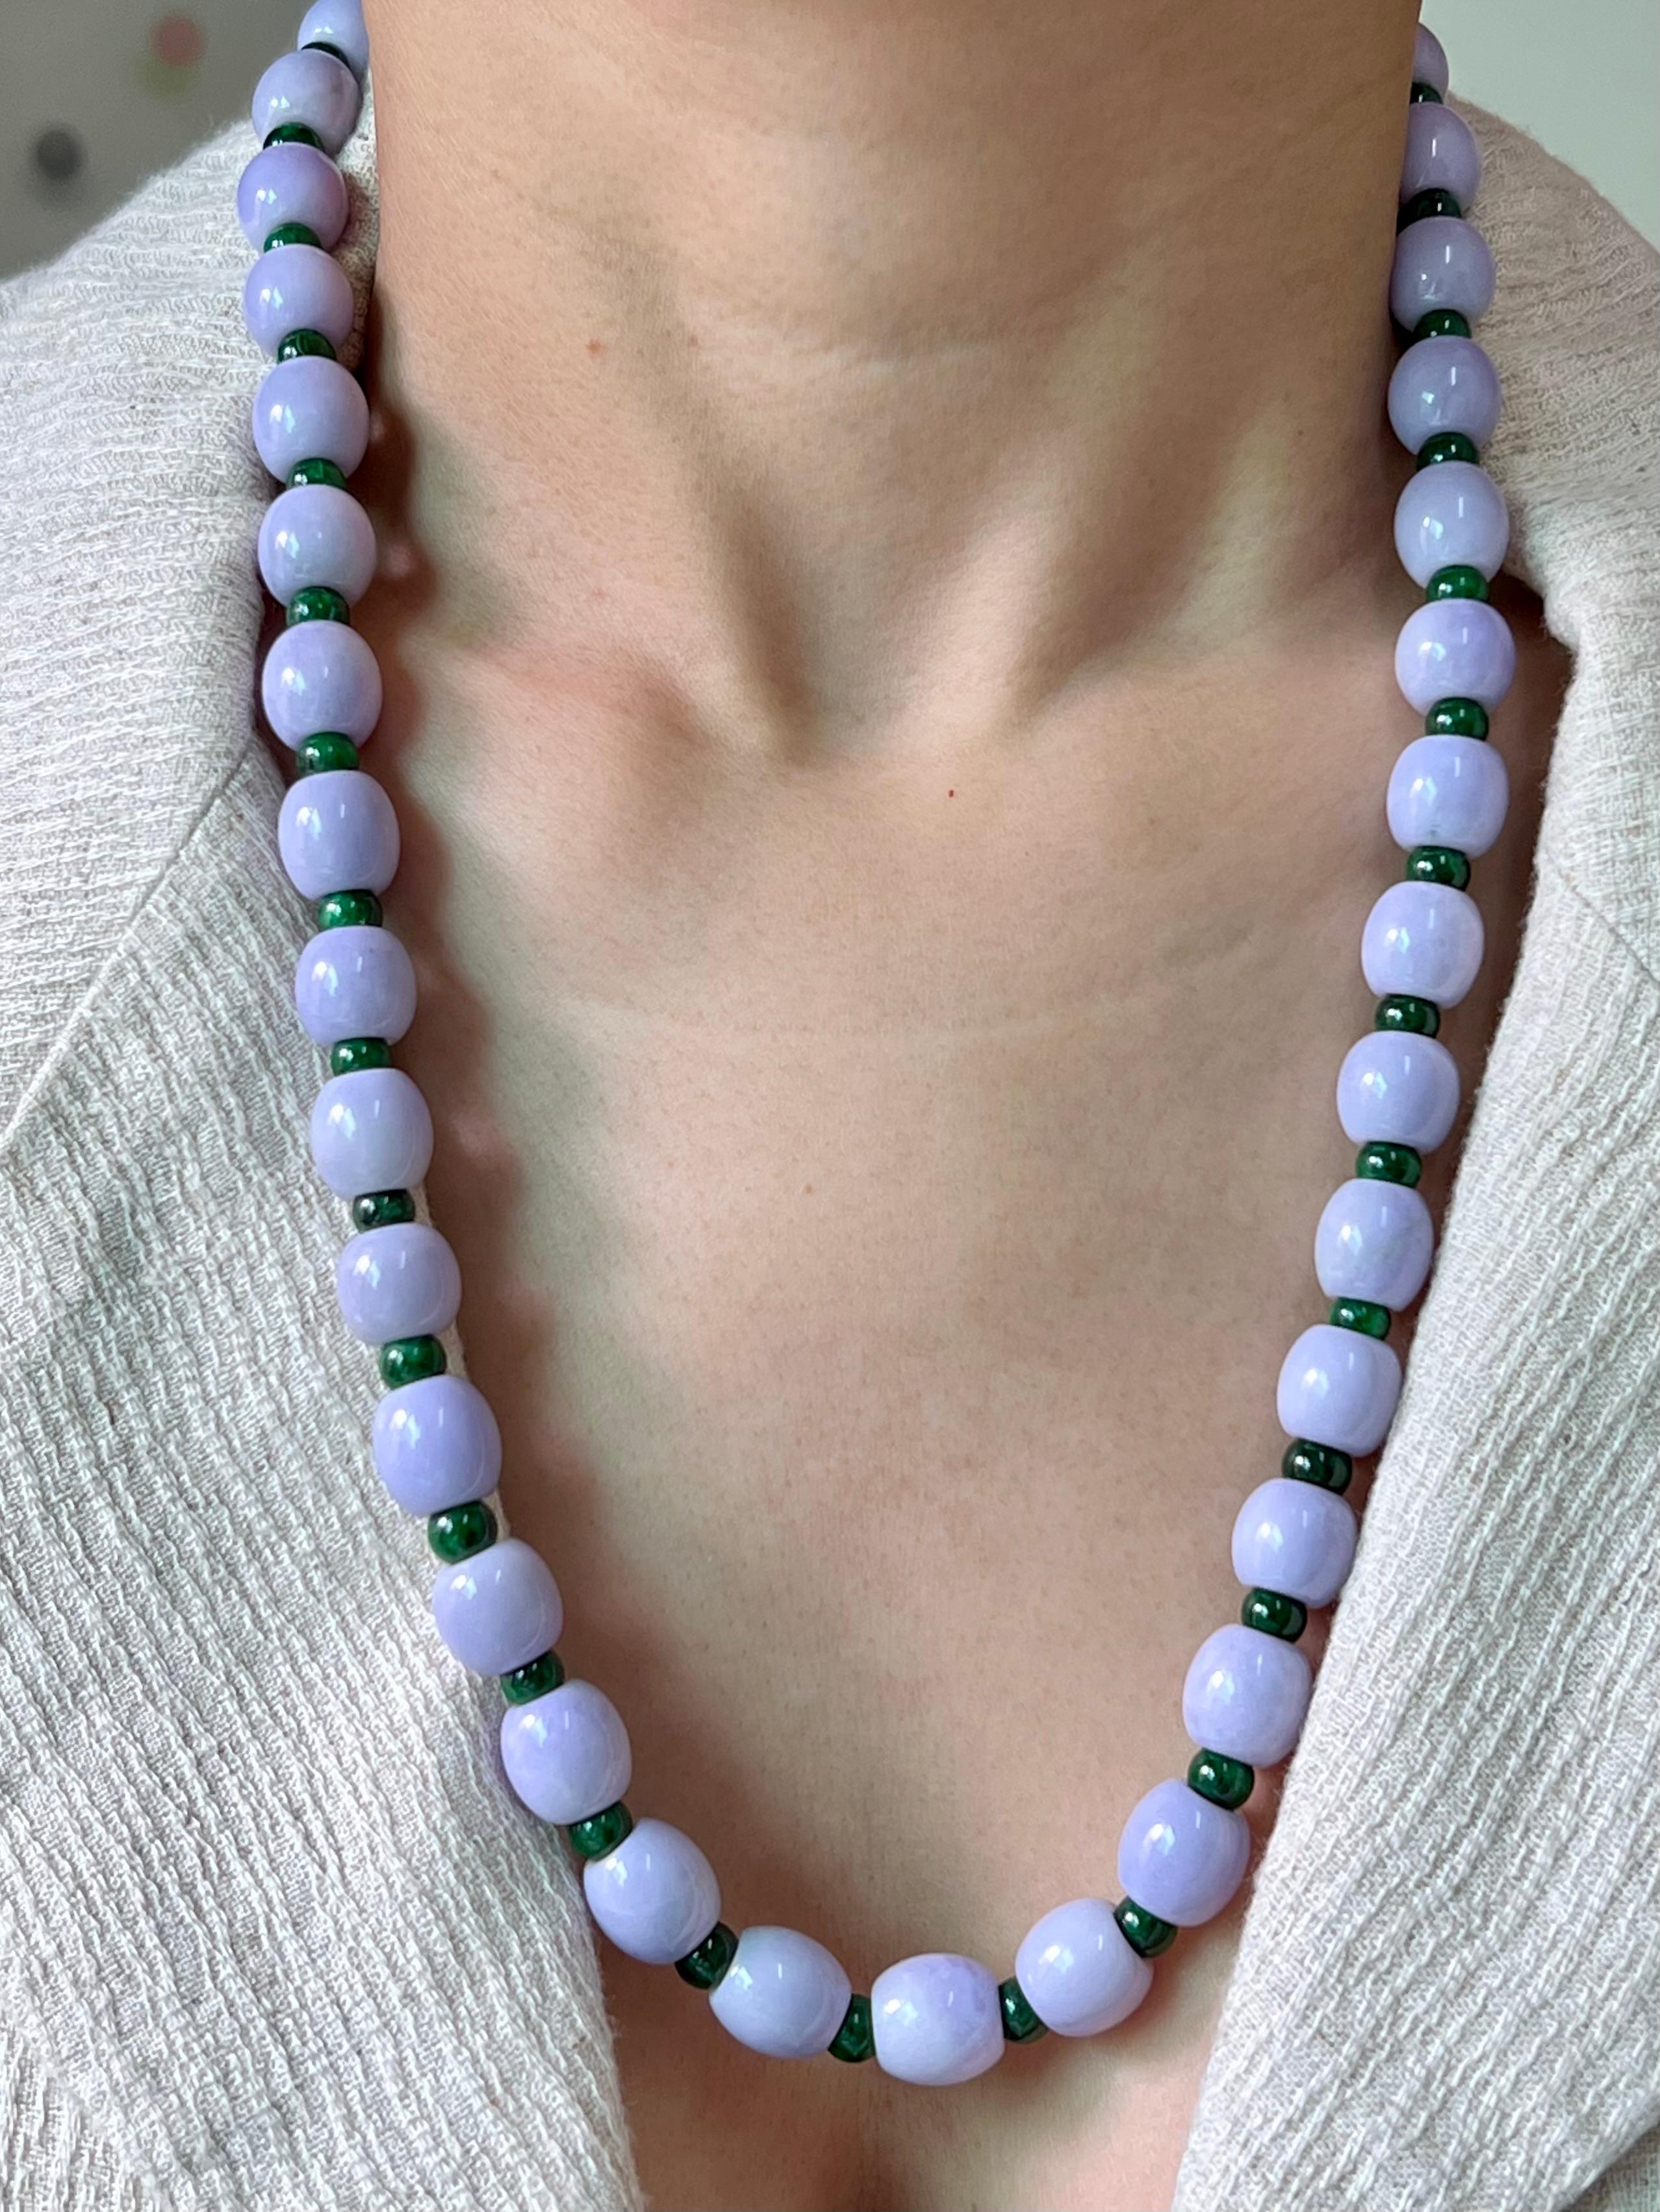 Please check out the HD video! BIG statement piece. For your consideration is an important natural lavender jade necklace. Natural Lavender jade beads (Lotus seed) of this color and size are not often seen. The purple jade beads are about 11.5mm